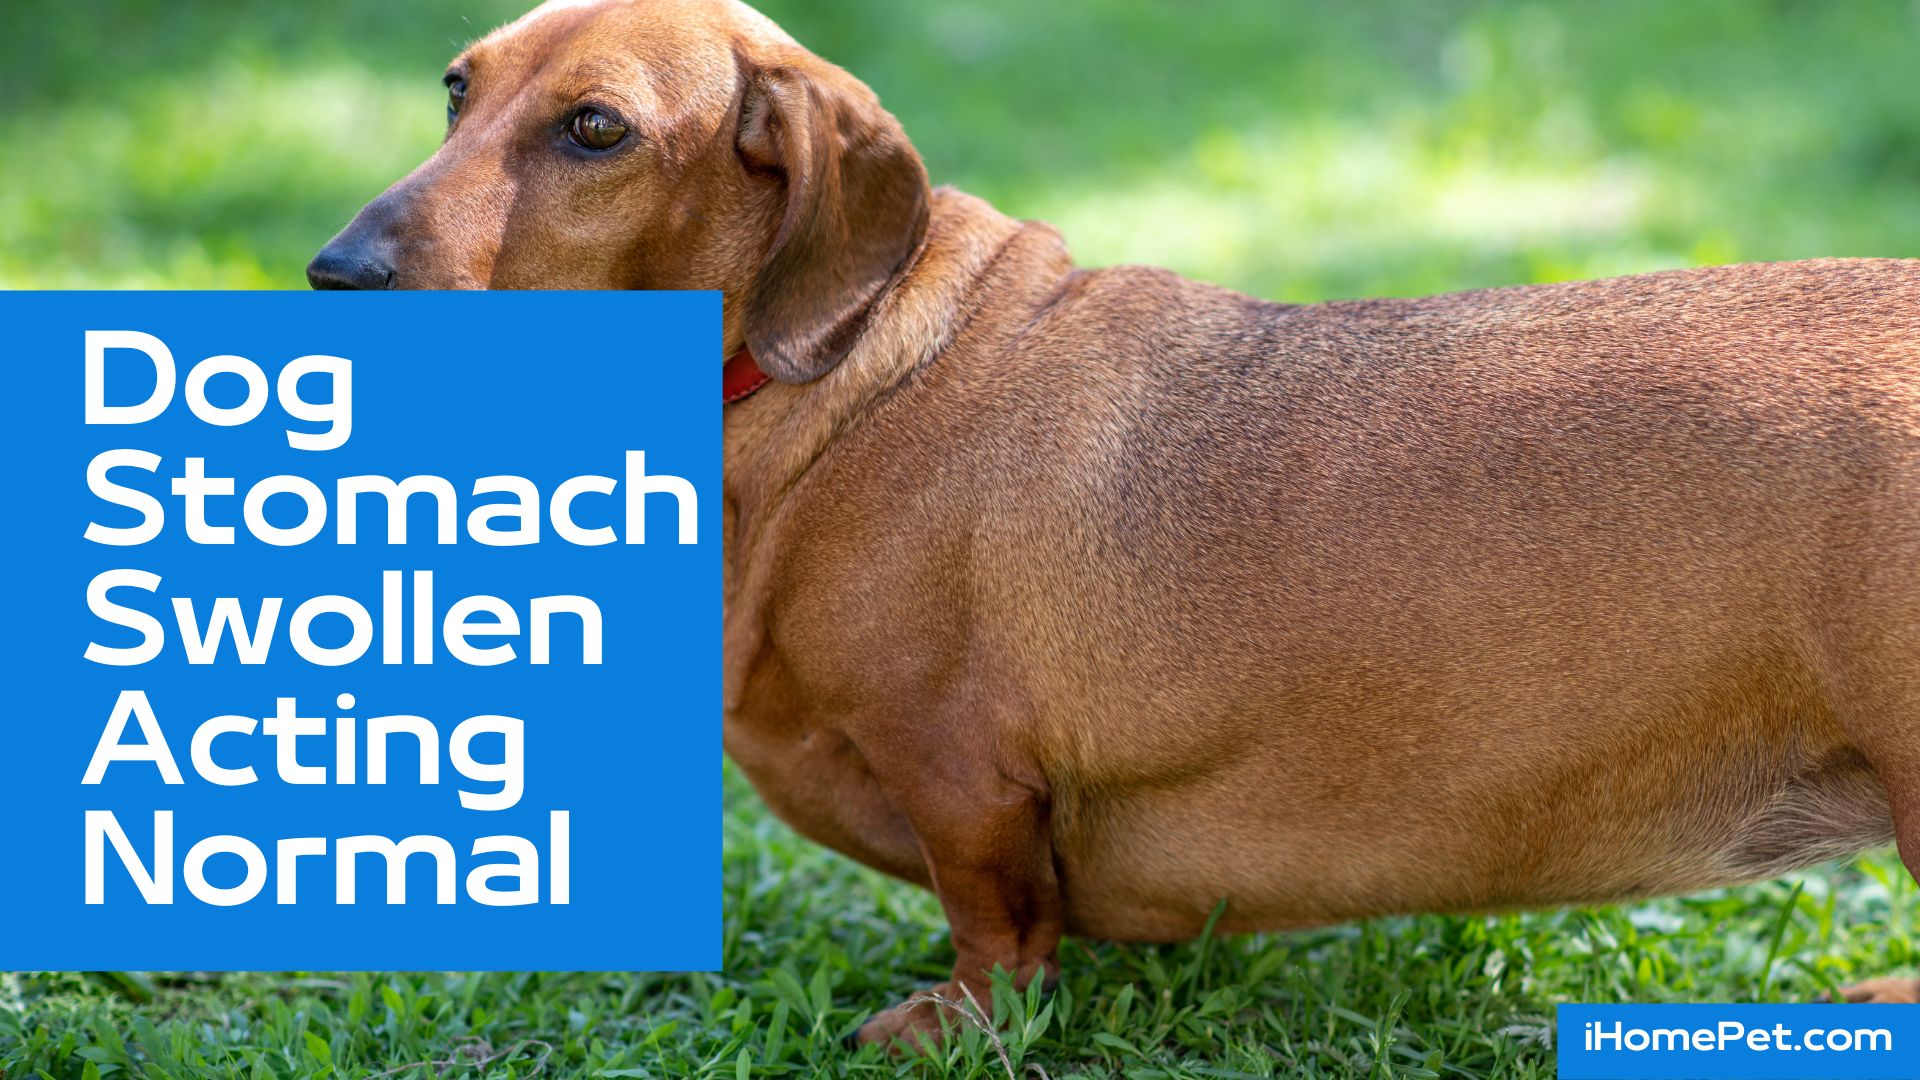 Common symptoms of a dog's swollen belly